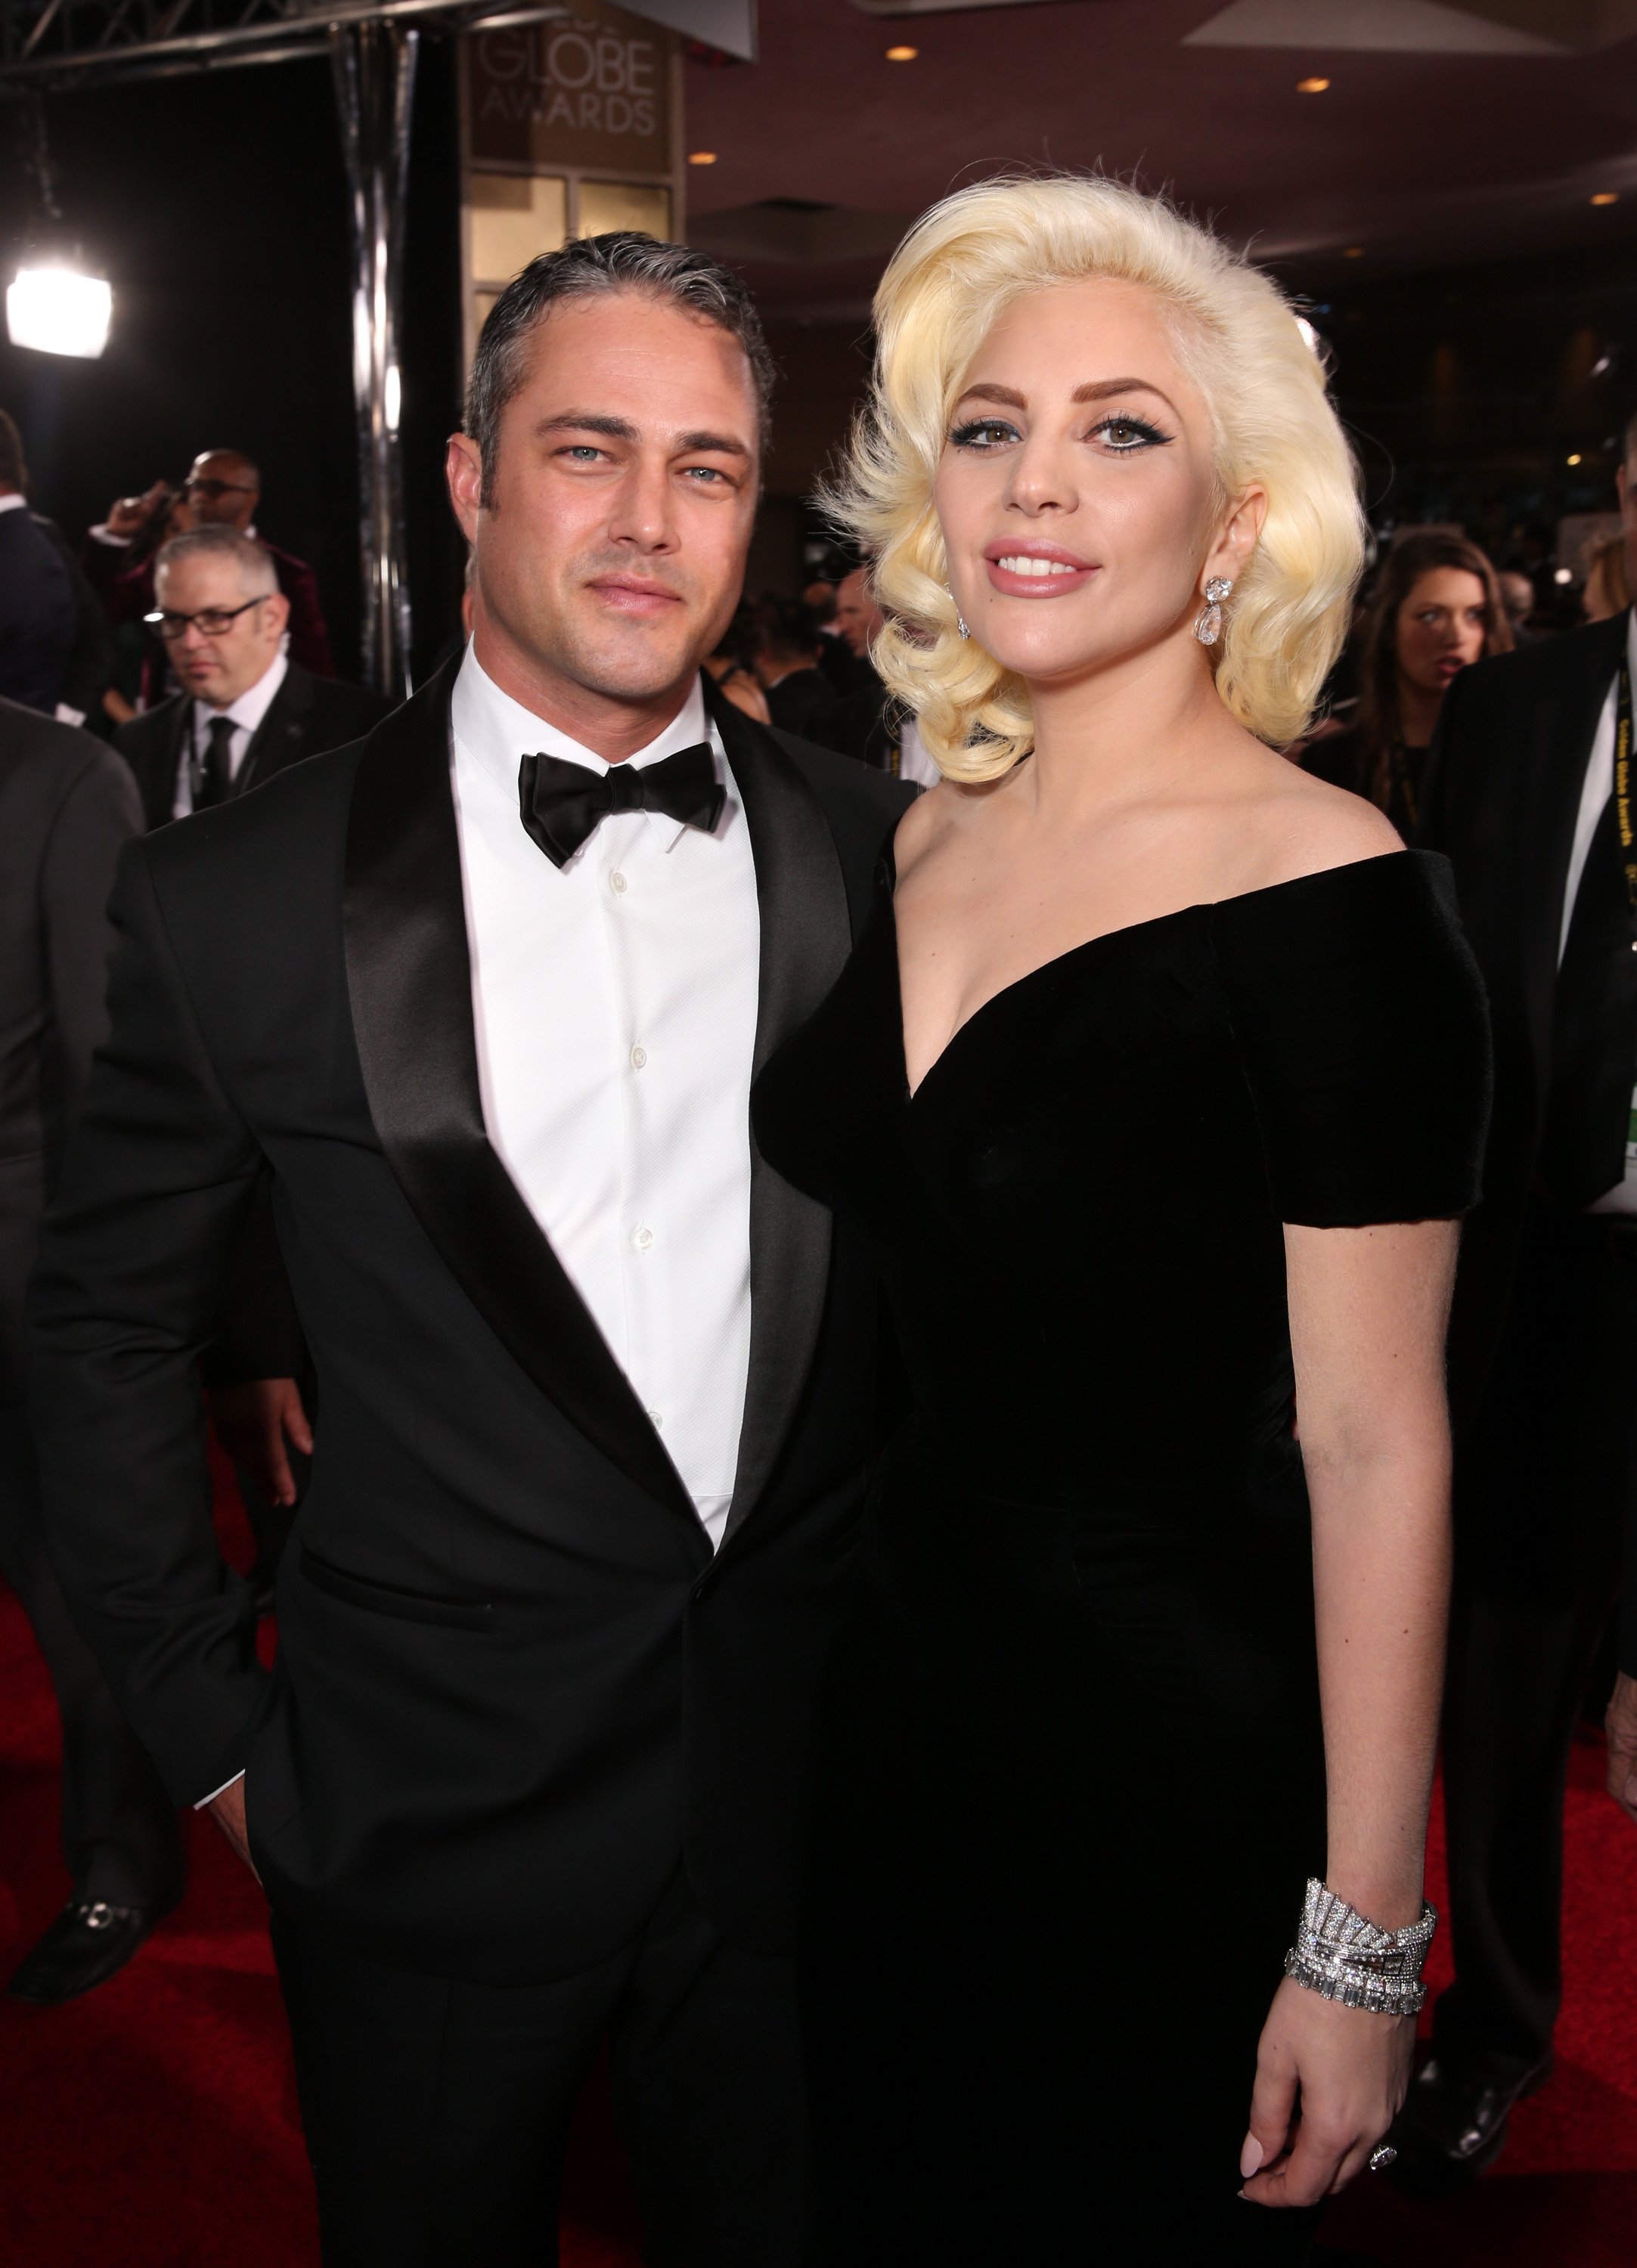 Taylor Kinney and Lady Gaga attend the 73rd Annual Golden Globe Awards at The Beverly Hilton Hotel on January 10, 2016, in Beverly Hills, California. | Source: Getty Images